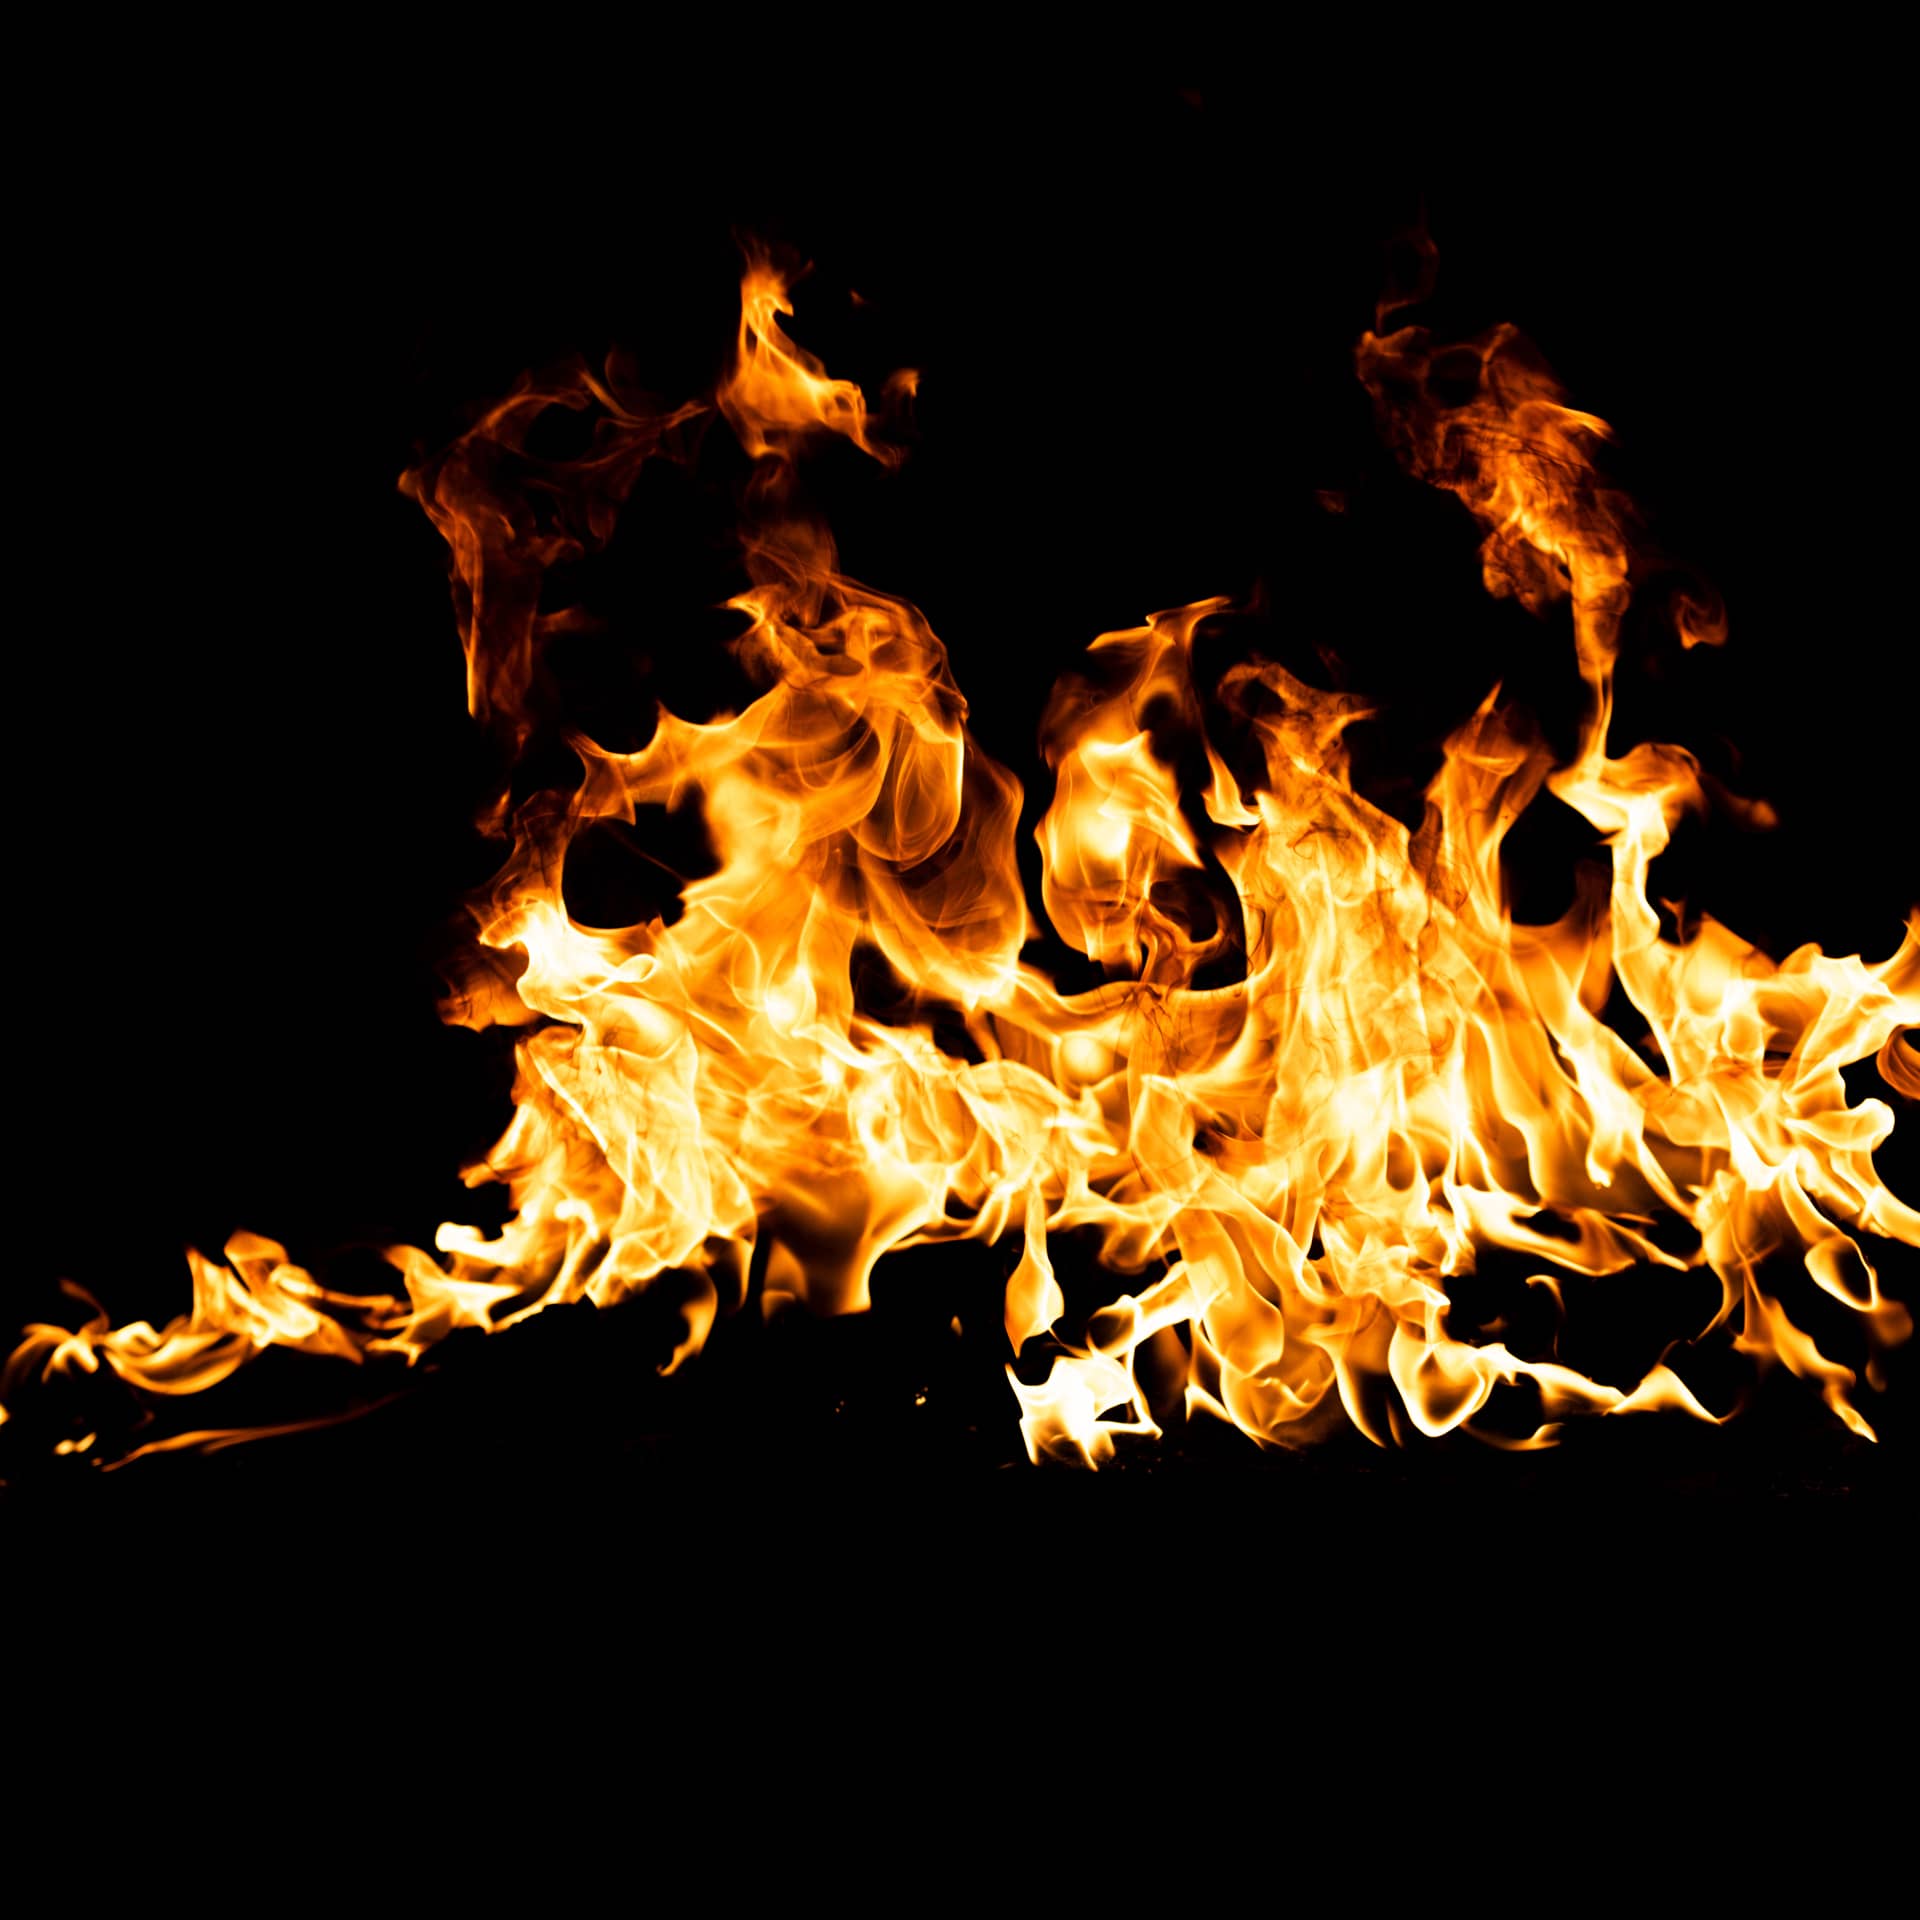 Fire flames isolated black background picture